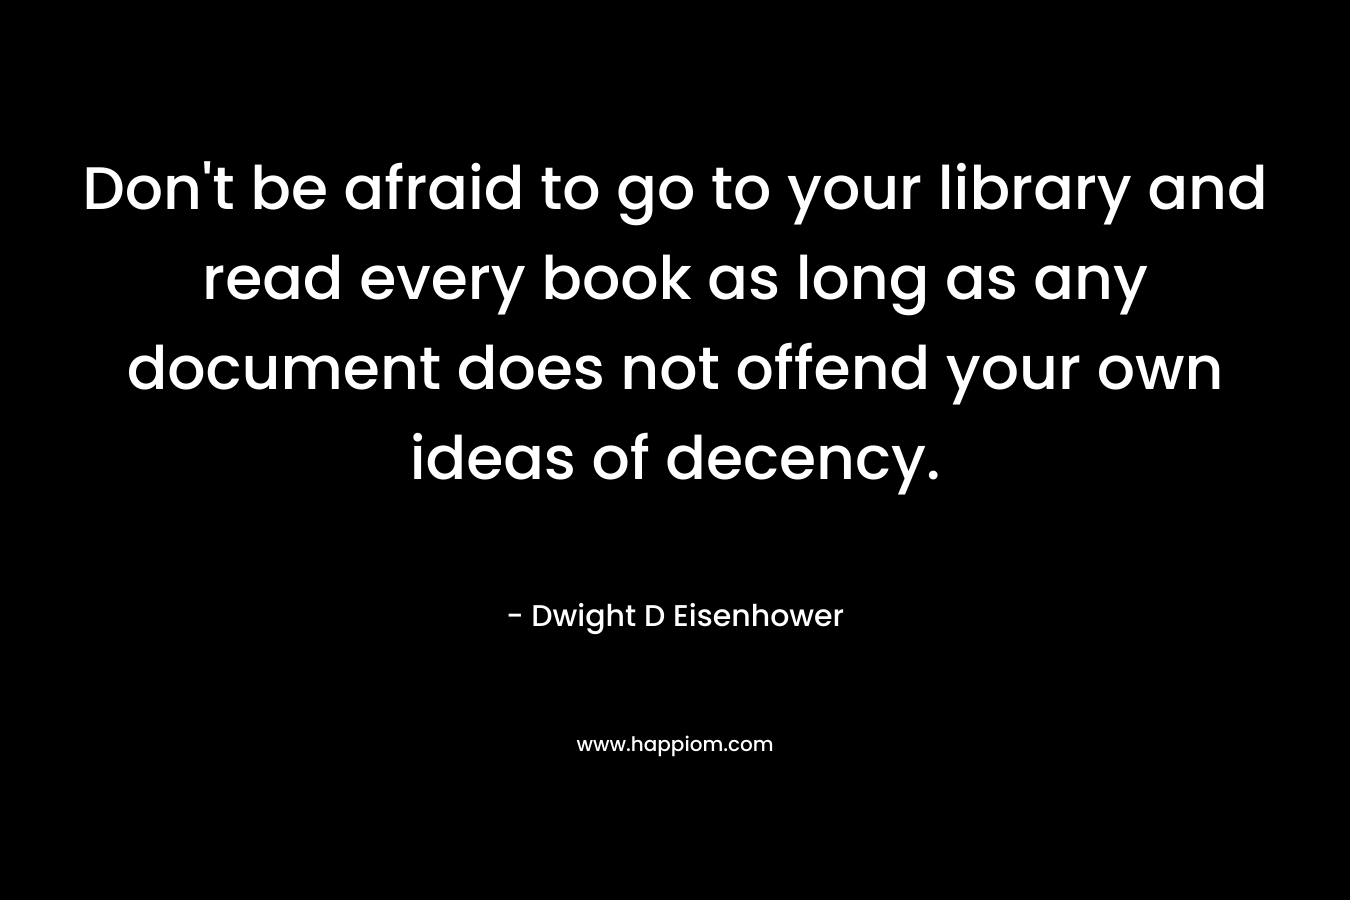 Don’t be afraid to go to your library and read every book as long as any document does not offend your own ideas of decency. – Dwight D Eisenhower